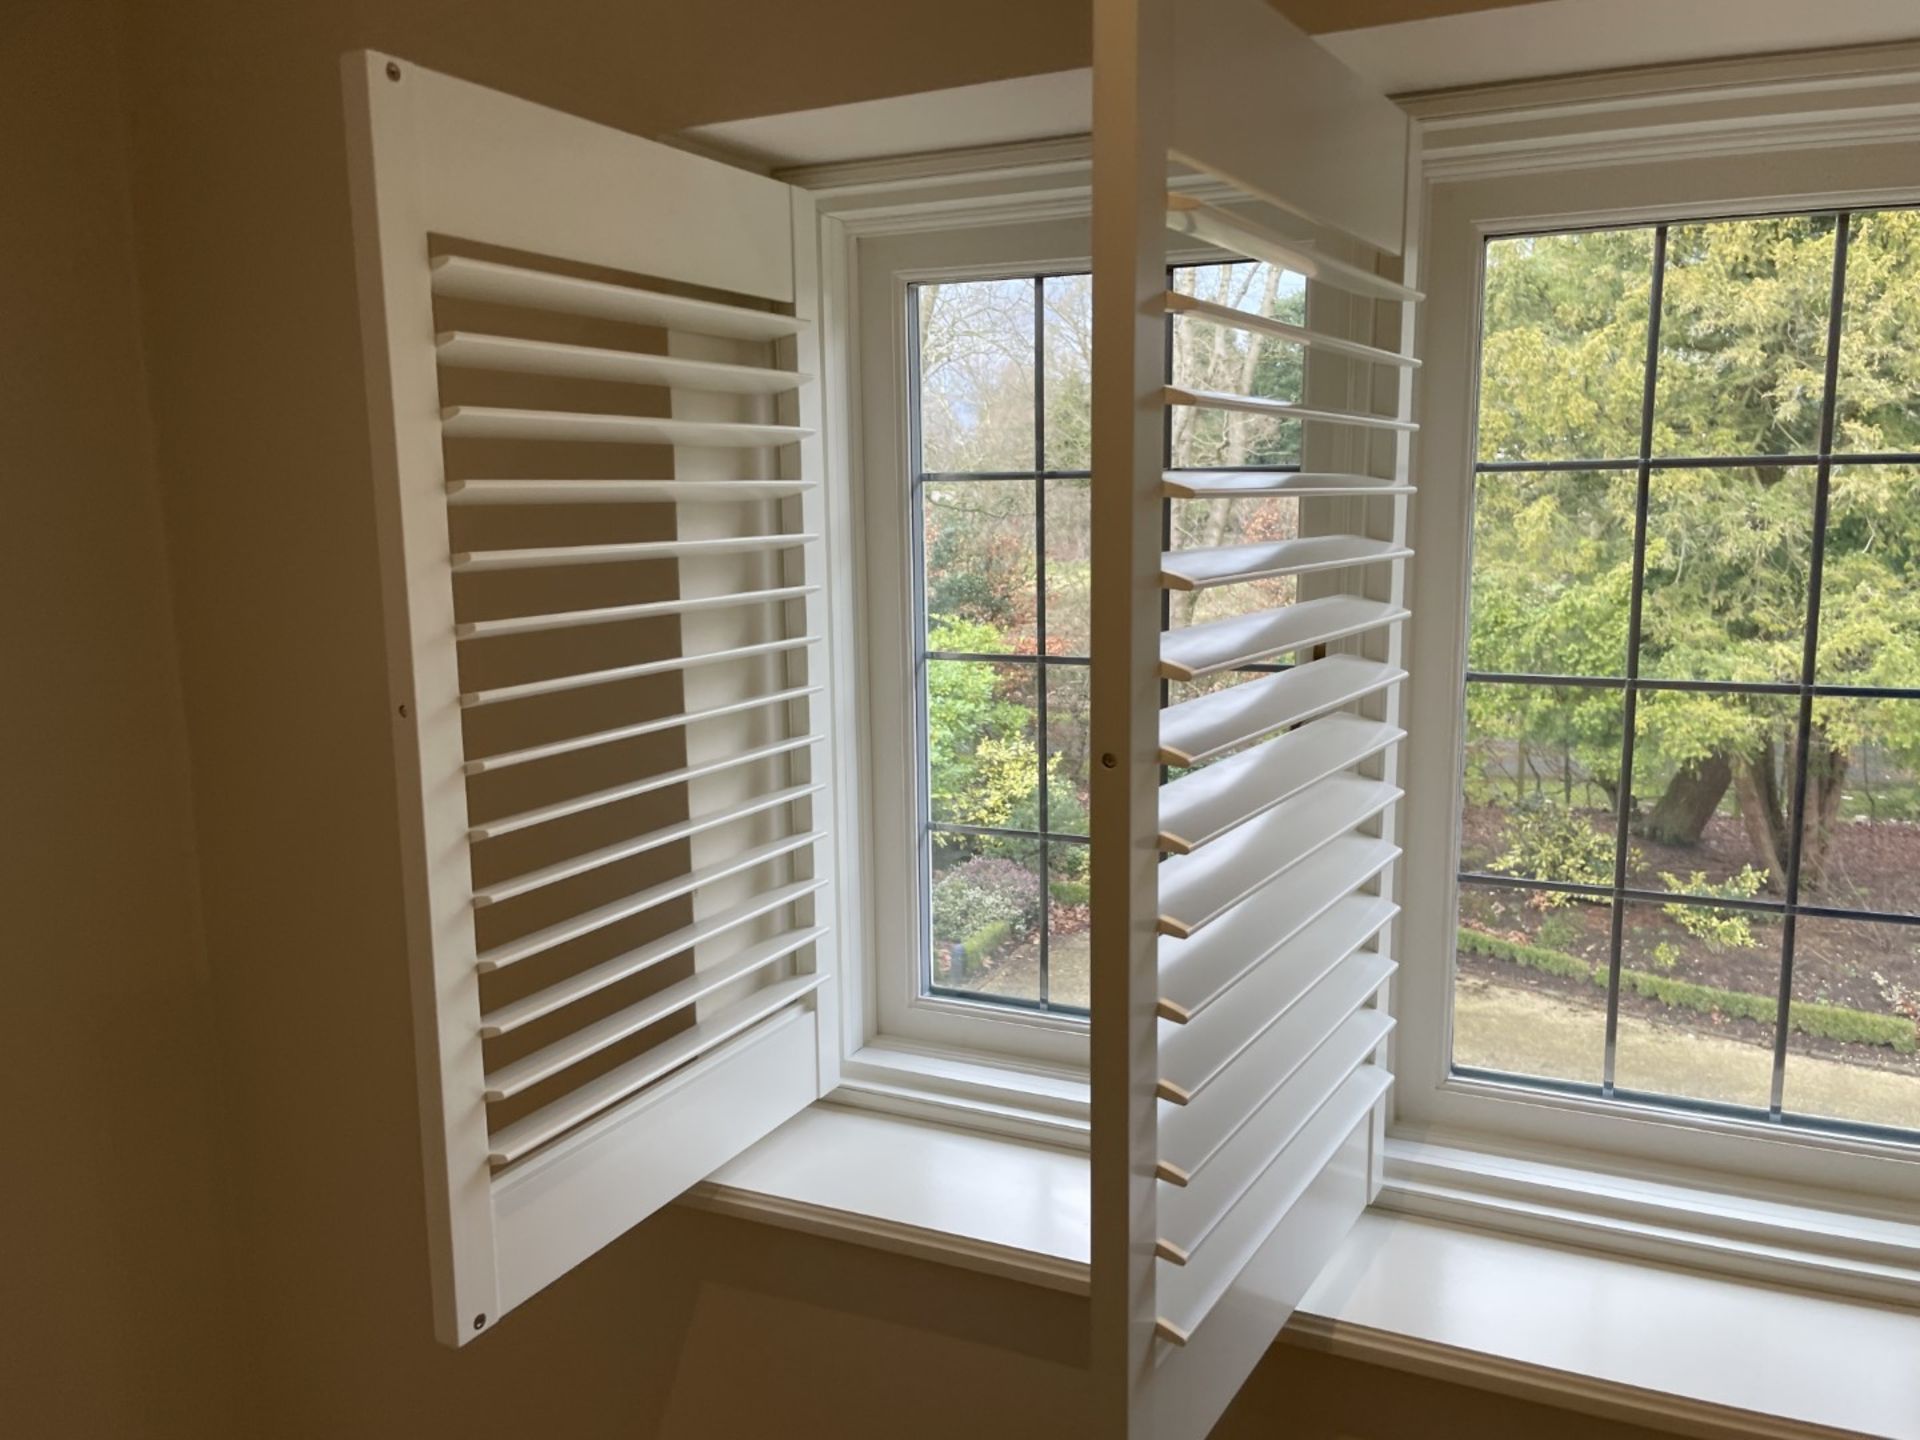 1 x Hardwood Timber Double Glazed Leaded 3-Pane Window Frame fitted with Shutter Blinds - Image 10 of 17